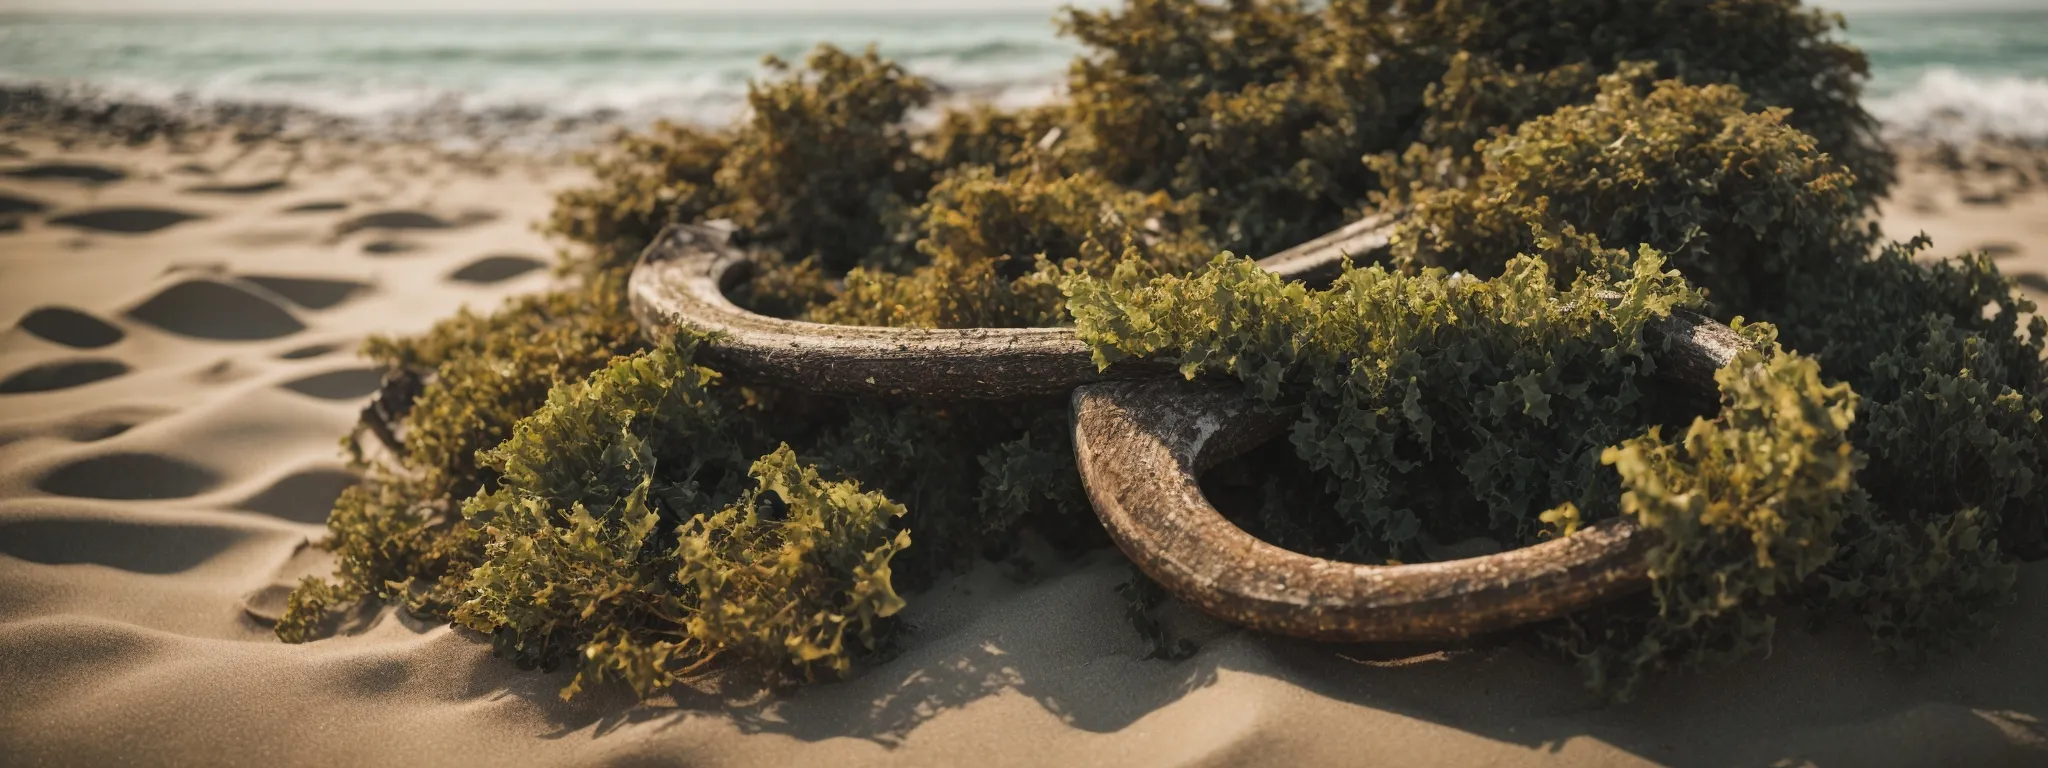 a close-up of an old nautical anchor entwined in seaweed lying on a sandy beach.